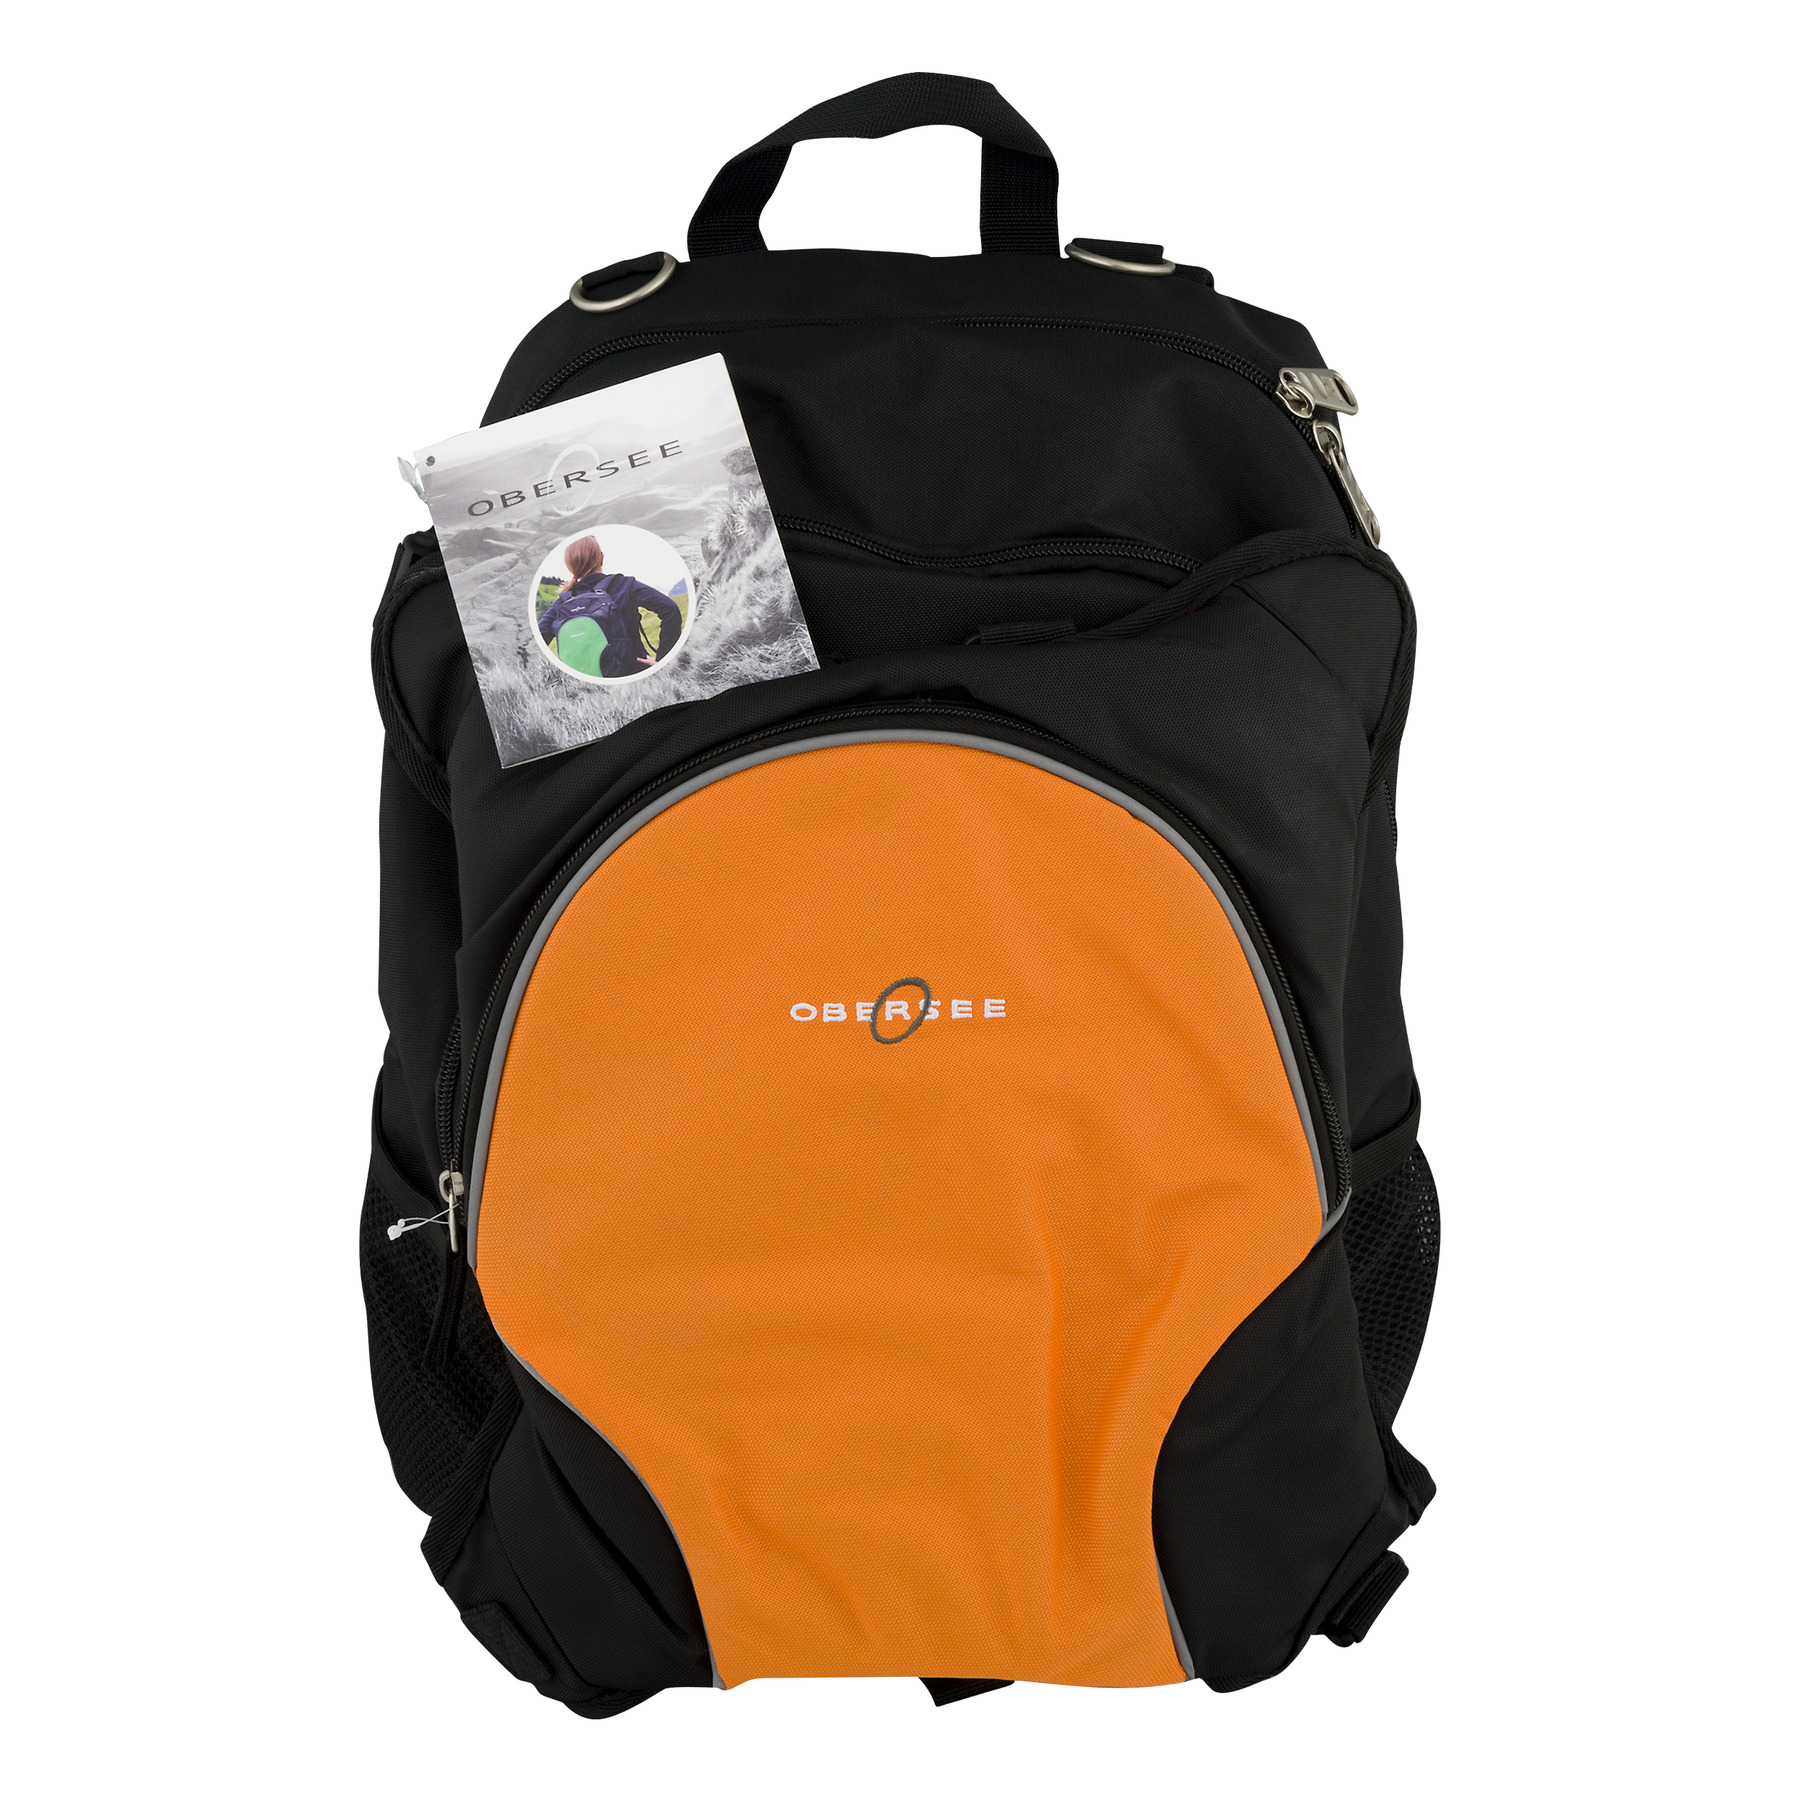 Obersee Rio Diaperbag Backpack | Detachable Bottle Cooler | Large Size Fully Padded Diaper changing mat - image 2 of 6